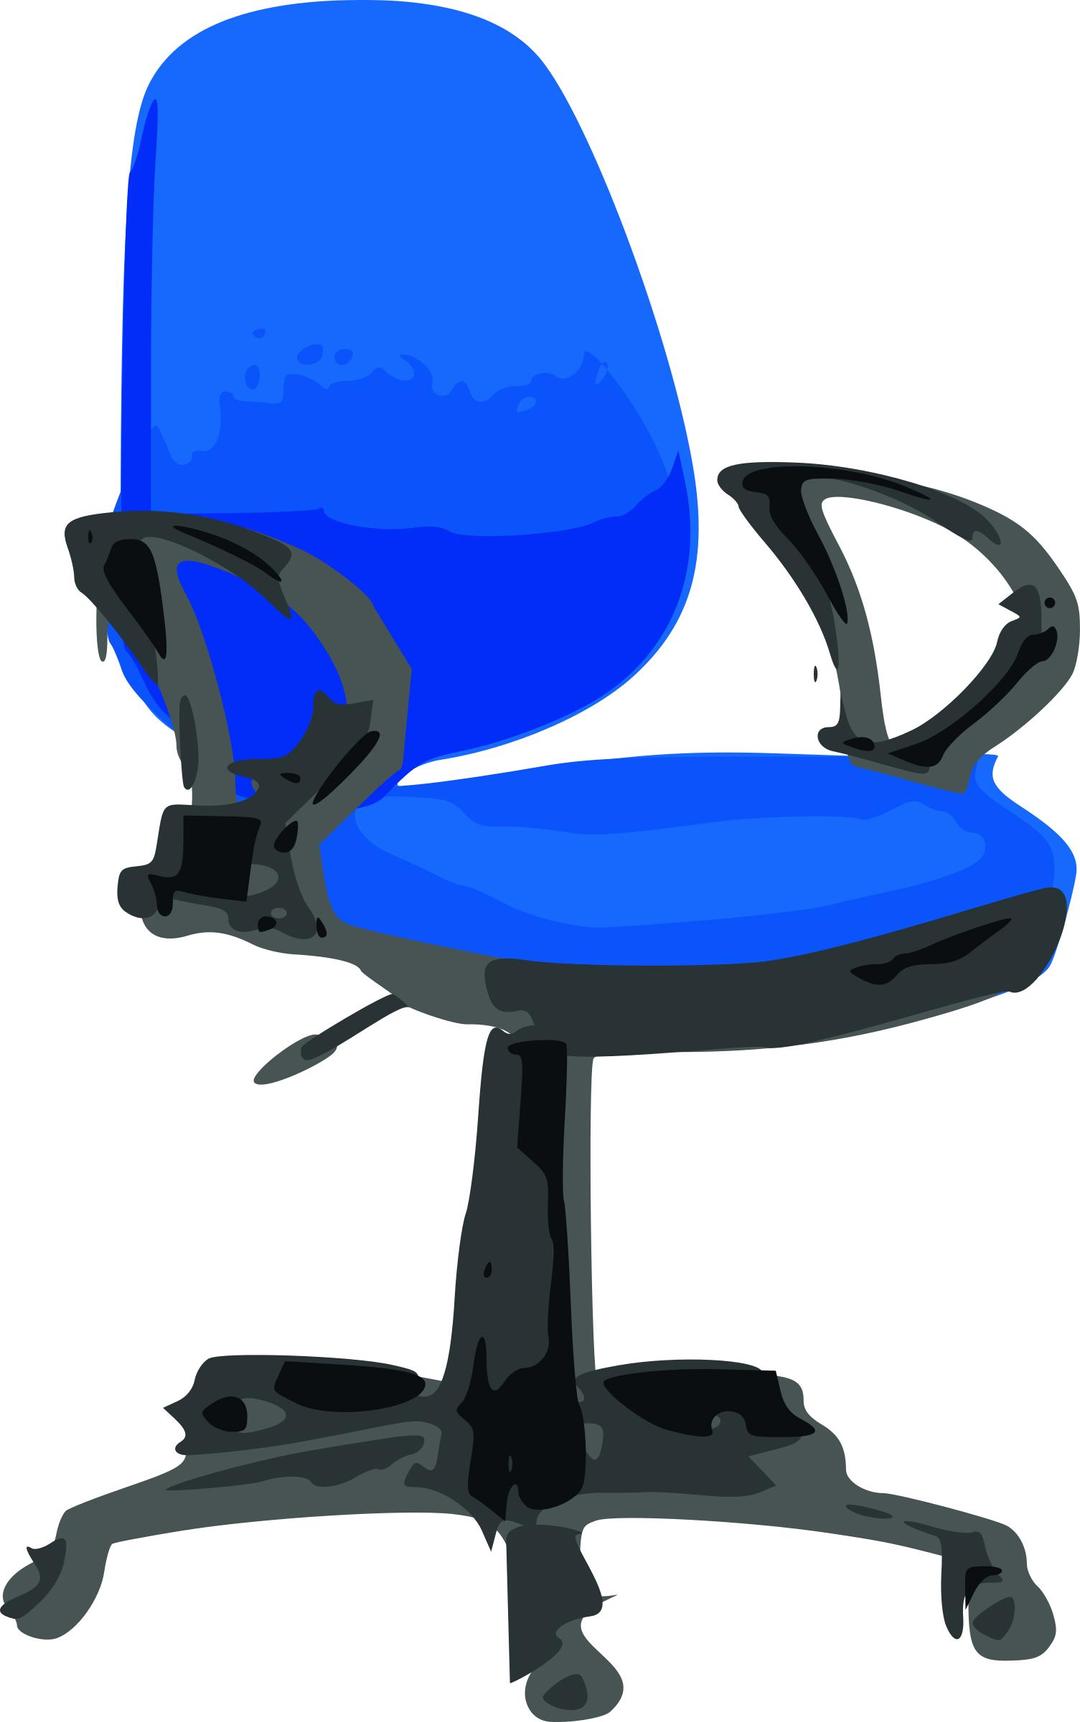 Desk Chair-Blue with wheels png transparent